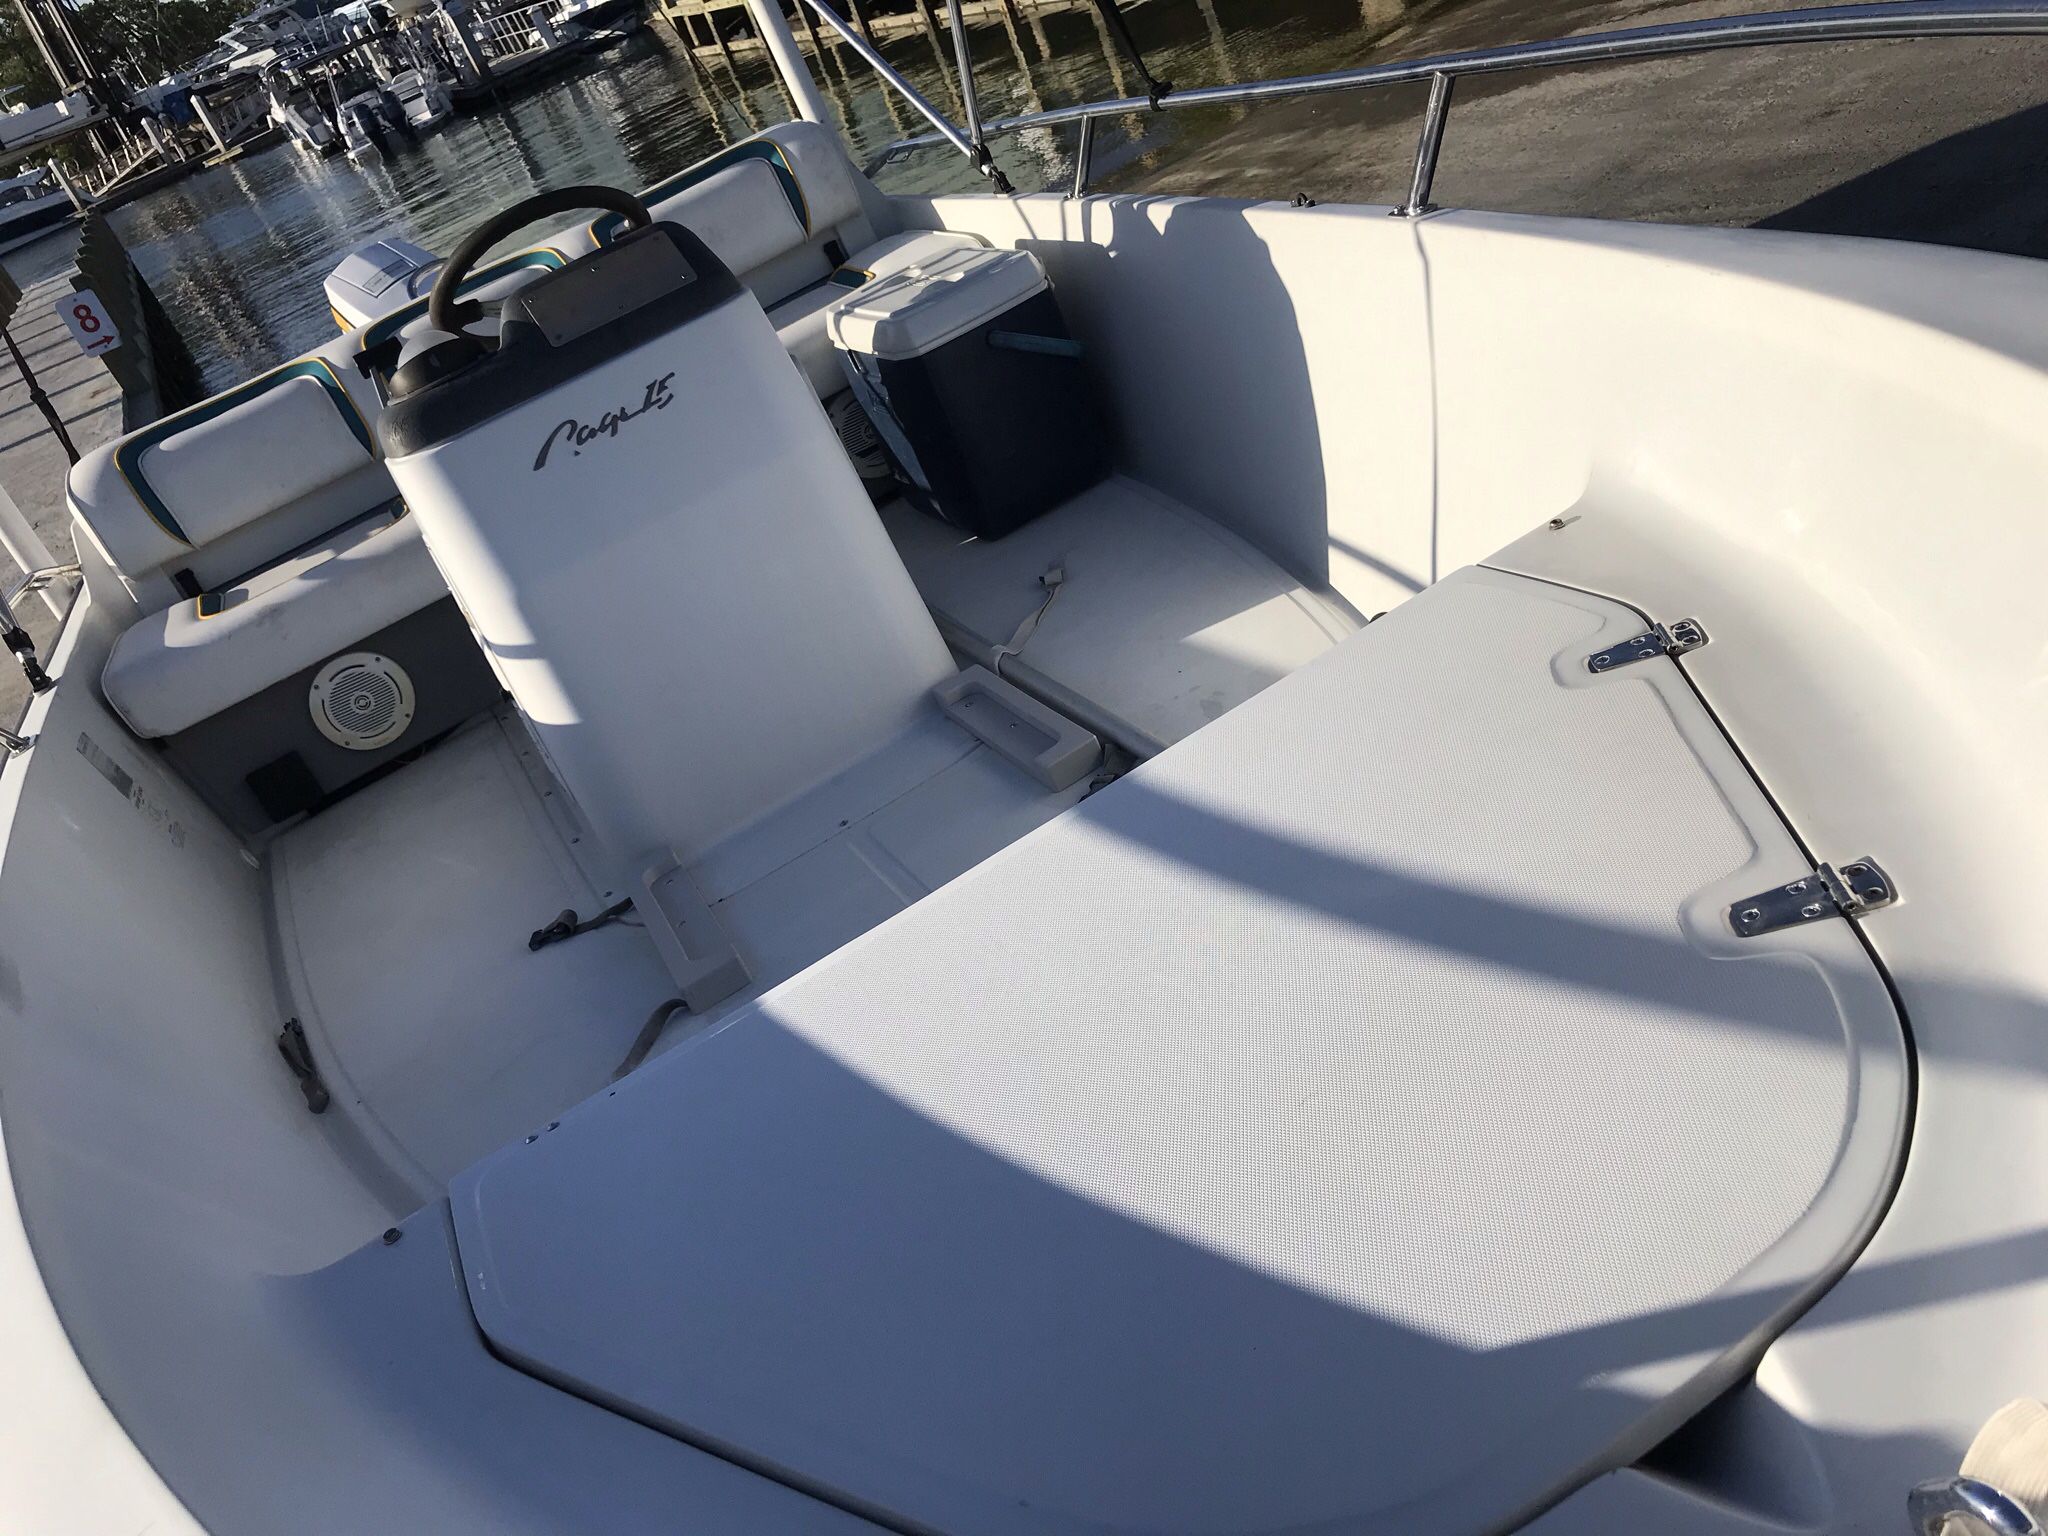 Photo Boston Whaler 16 Hull Only No Motor !!! Rigged For Johnson Outboard, 50 To 70 Hp.